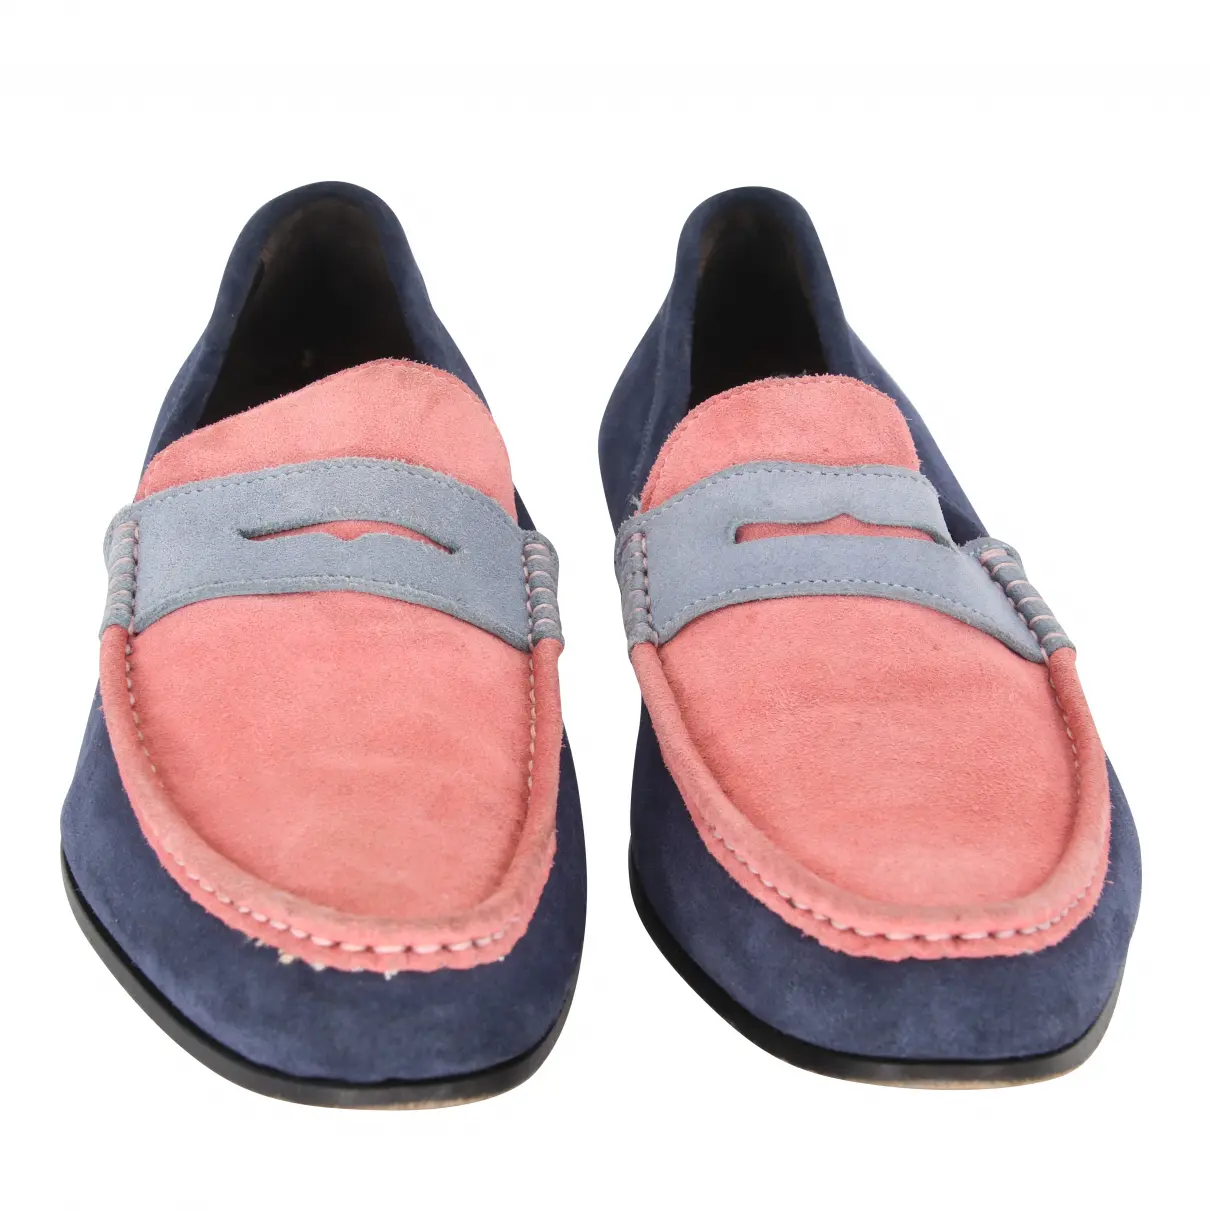 Buy Dsquared2 Flats online